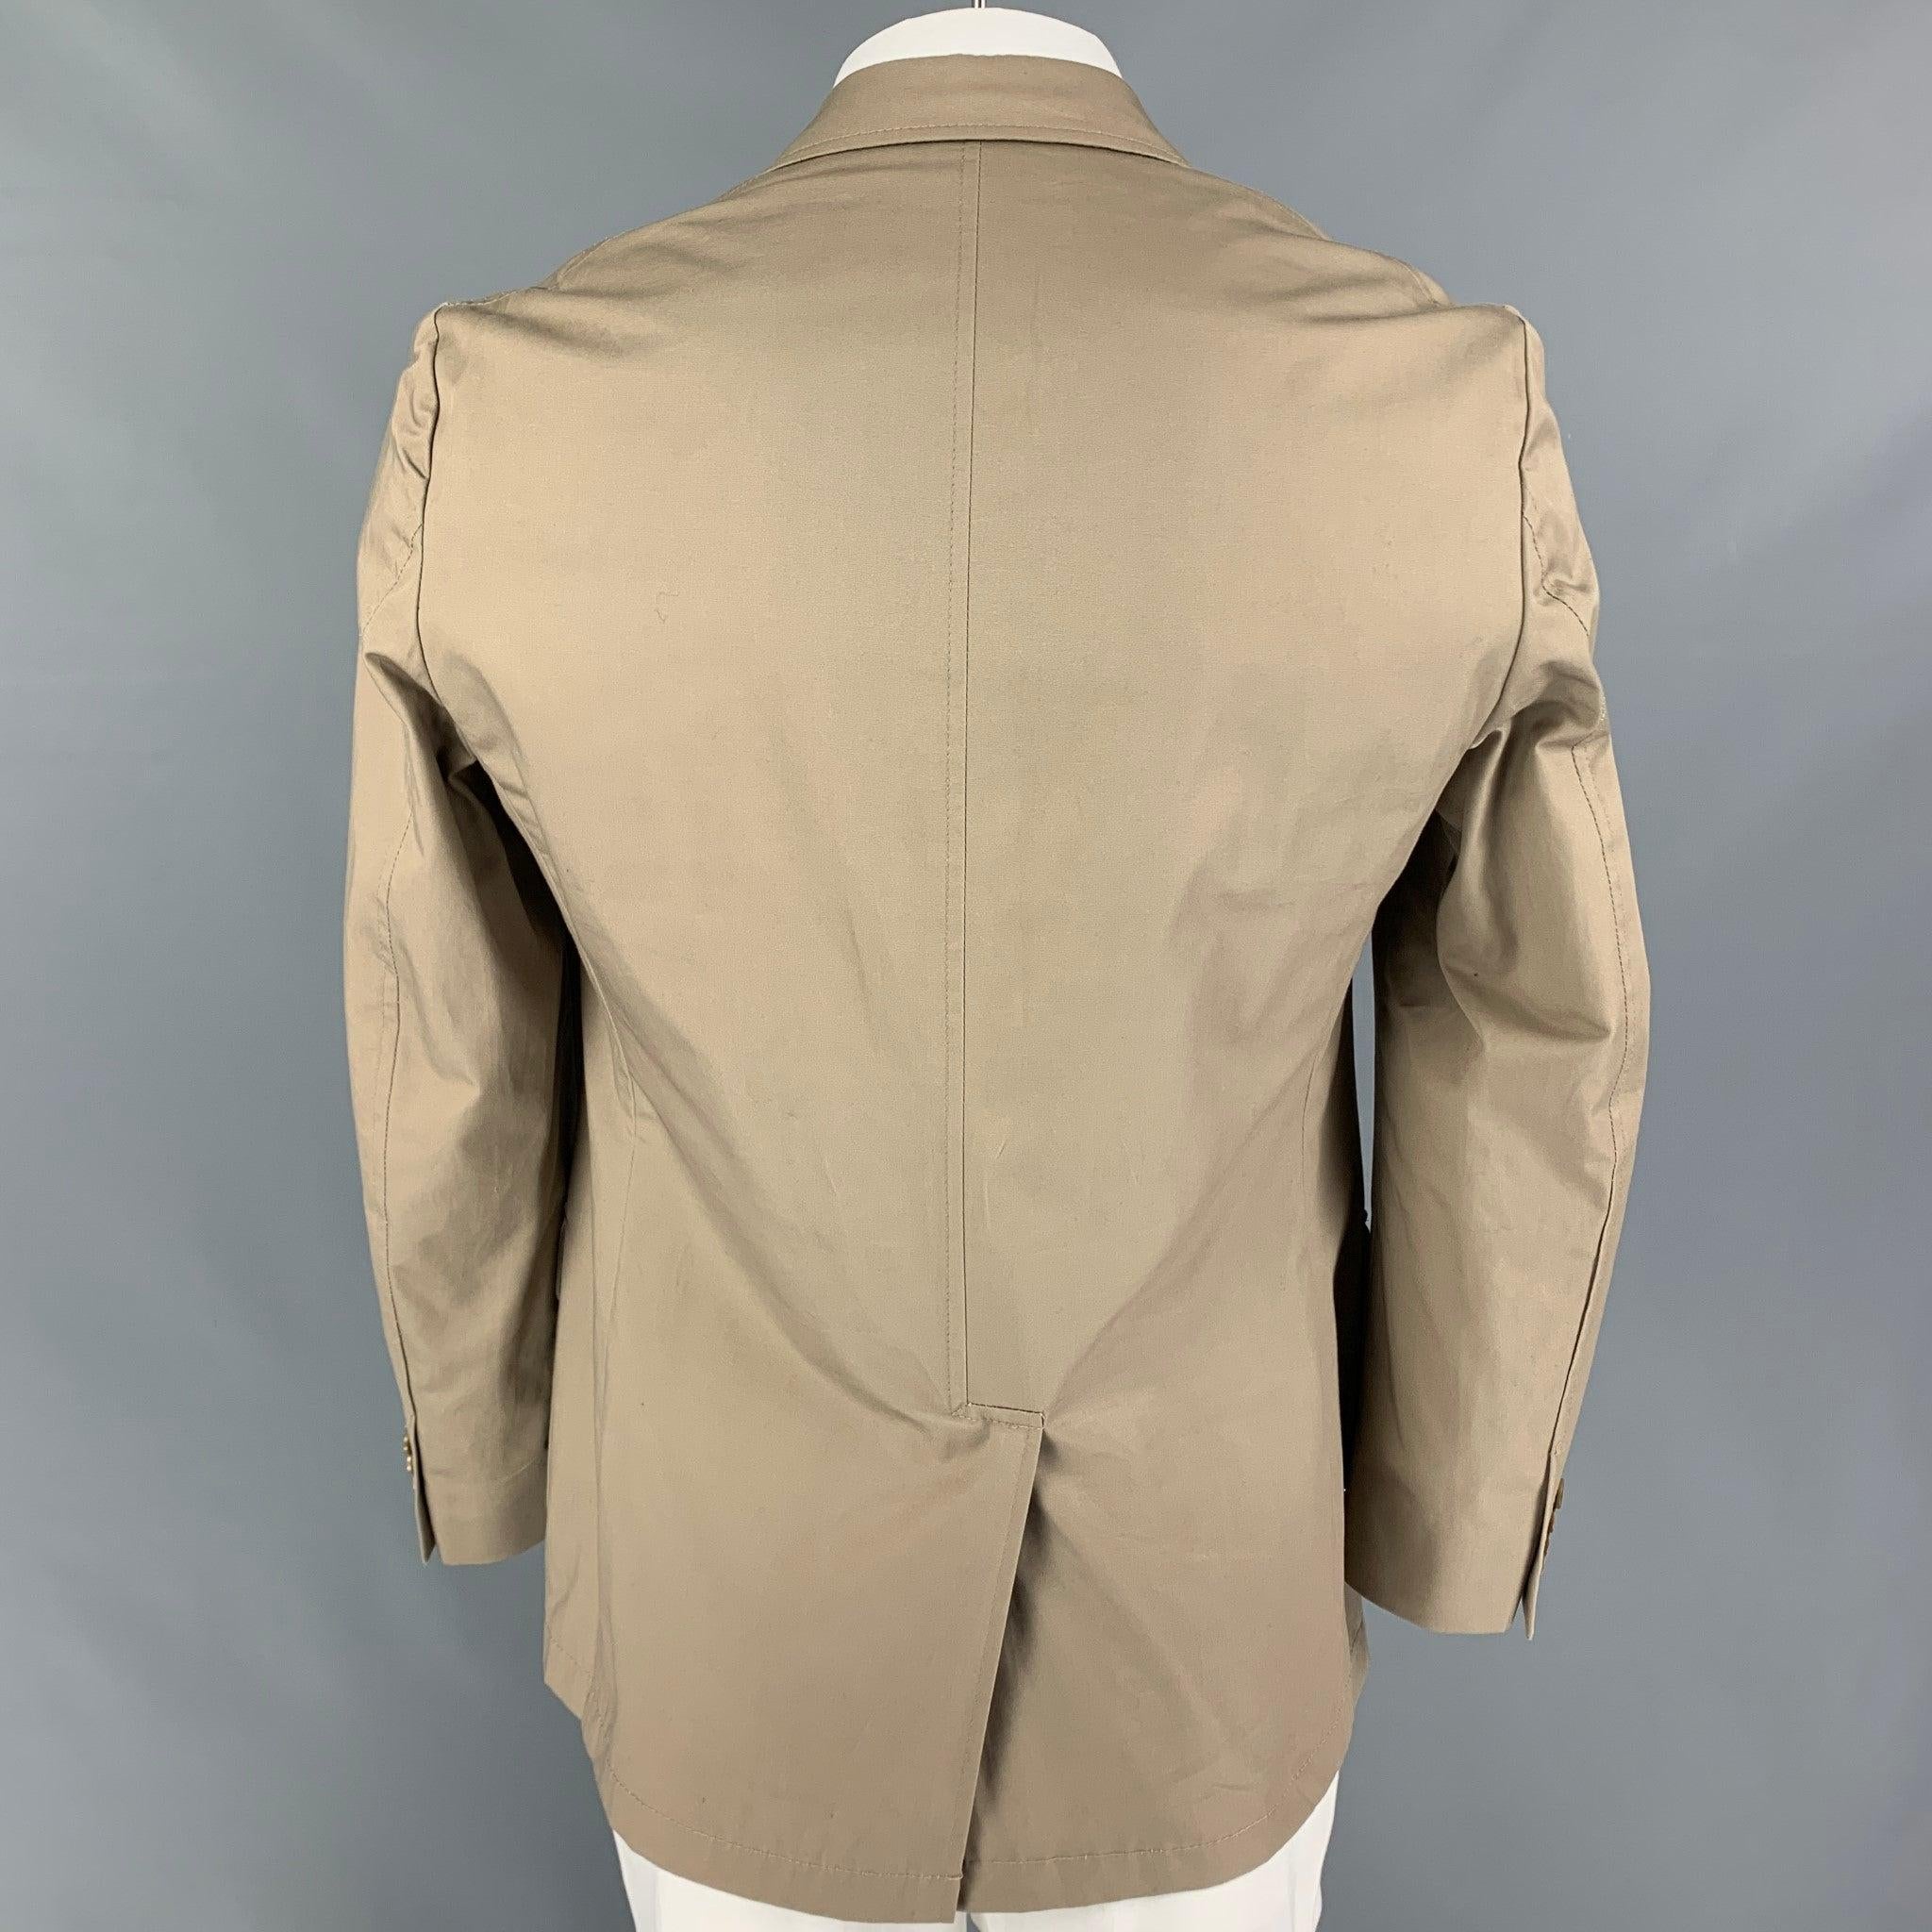 GITMAN BROS for UNIONMADE Size 40 Khaki Cotton Notch Lapel Sport Coat In Good Condition For Sale In San Francisco, CA